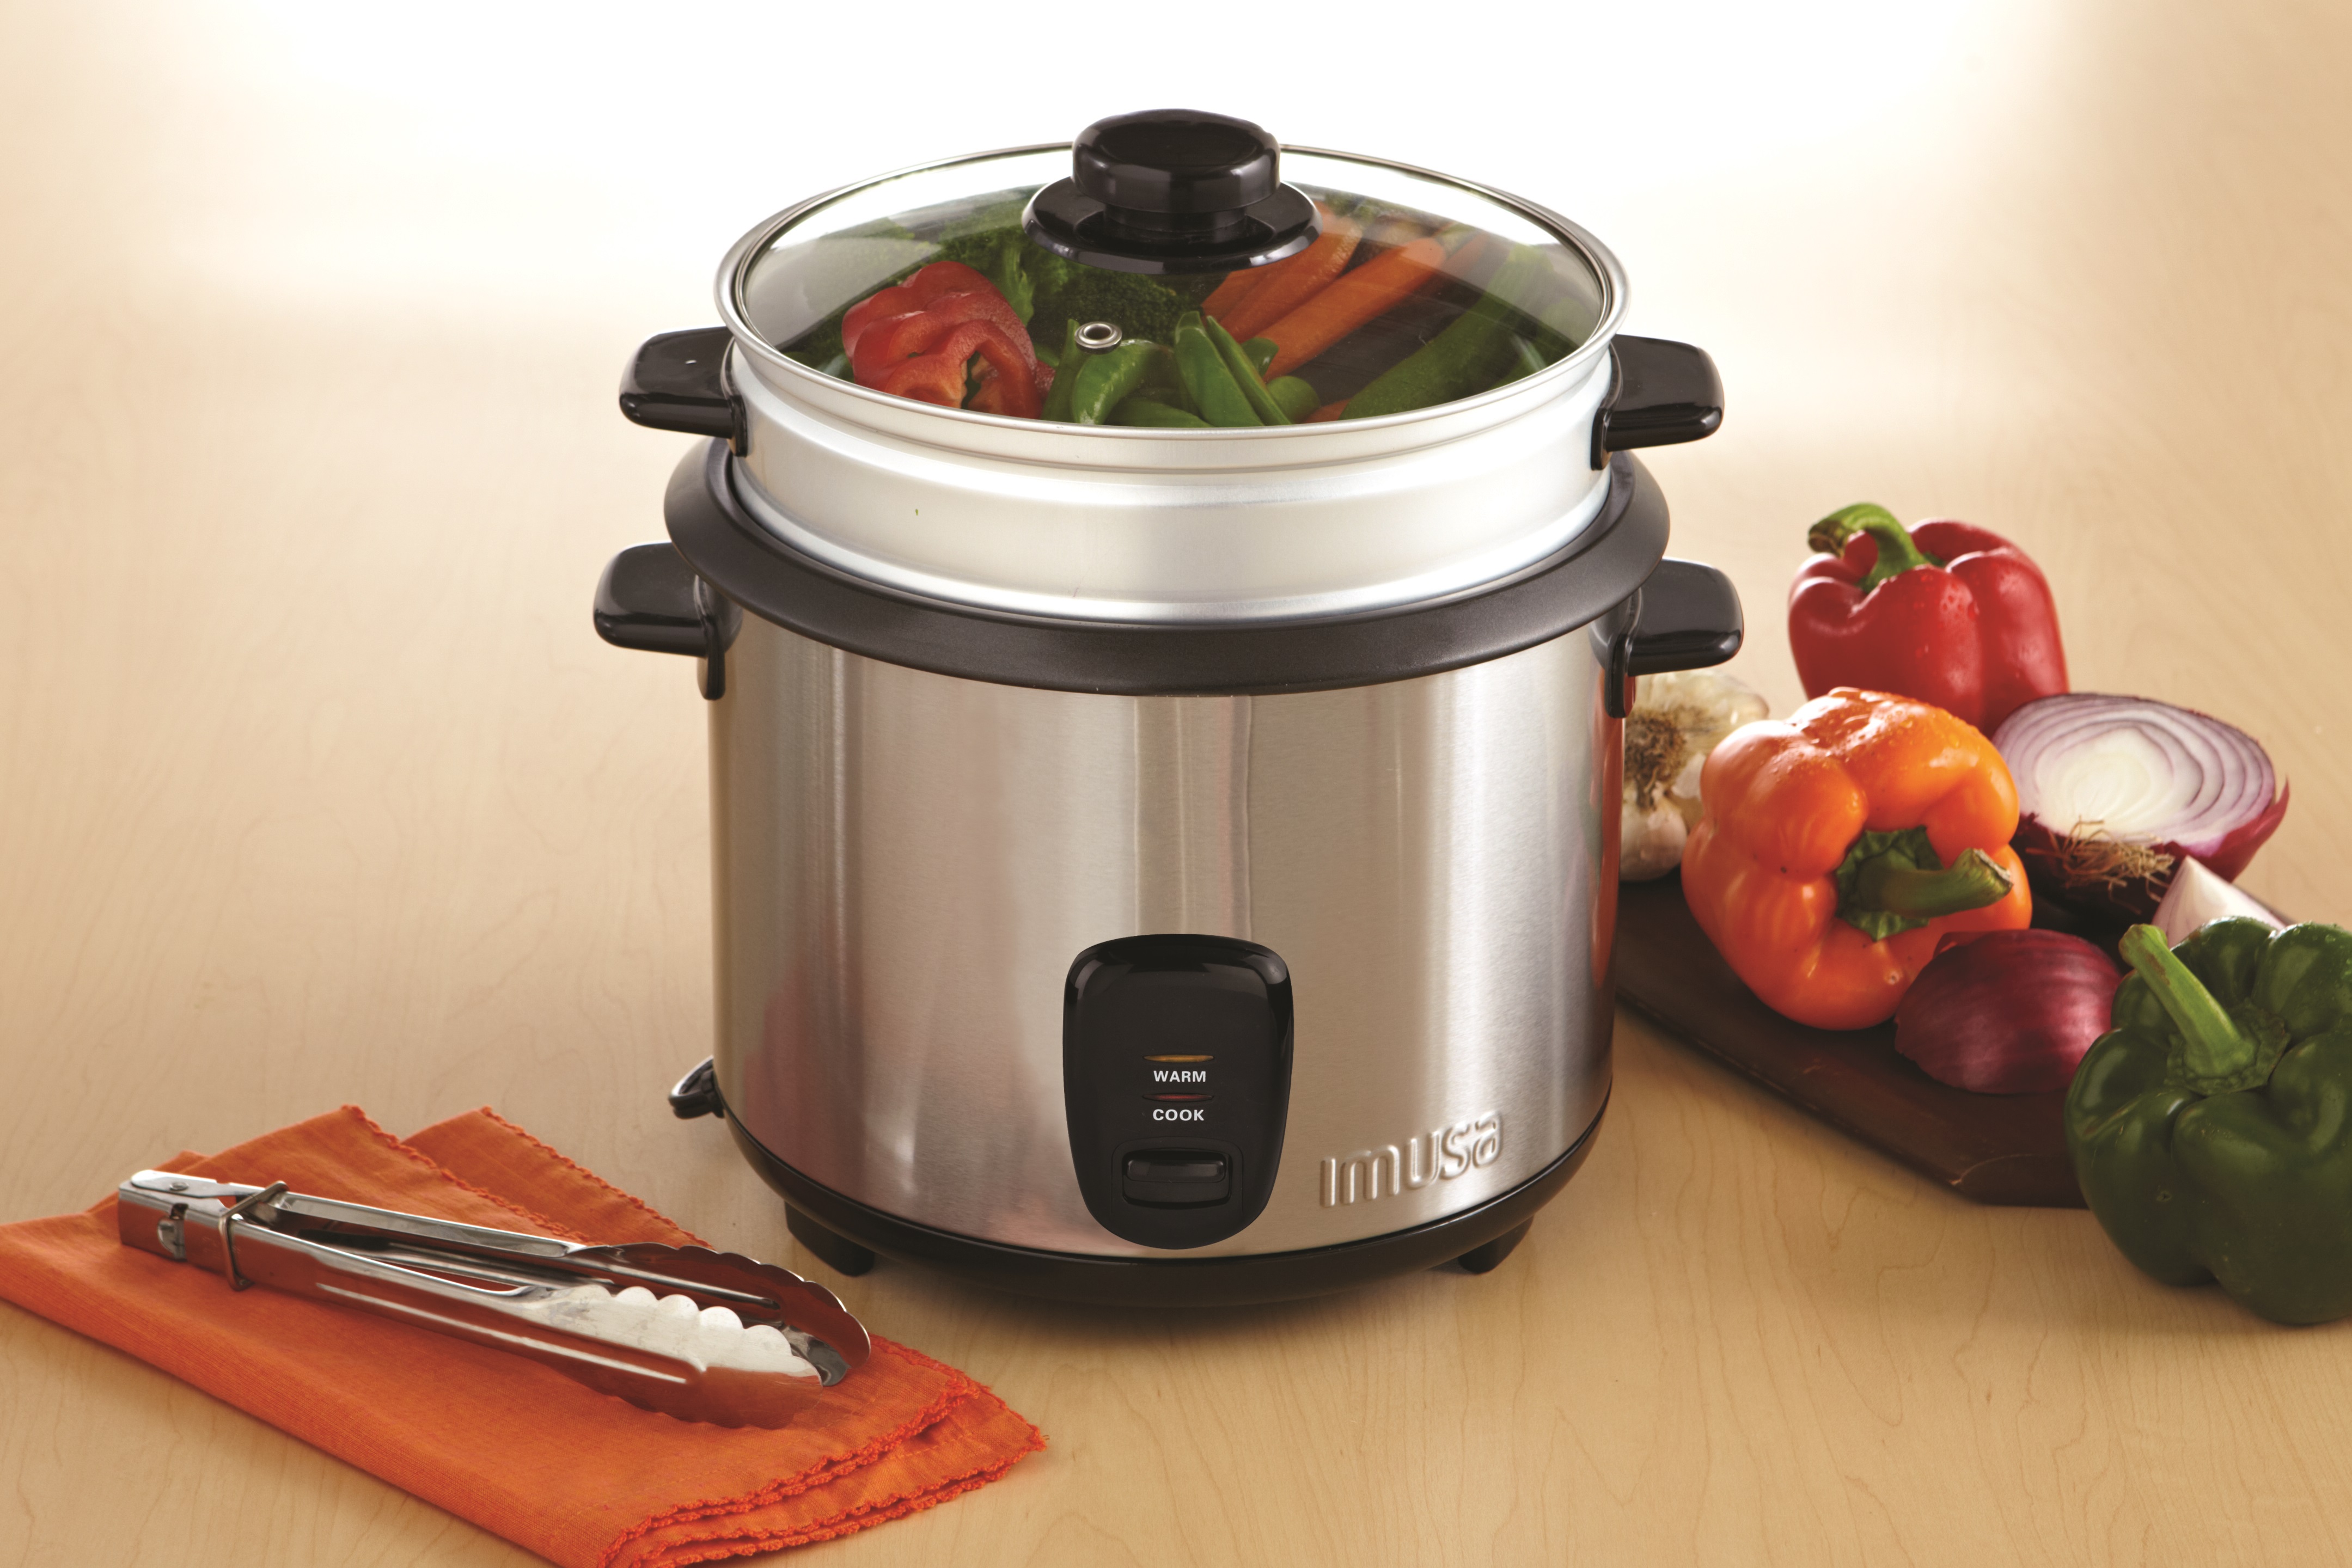 https://www.kitchenwarenews.com/lot-see-years-housewares-show/10-cup-rice-cooker/